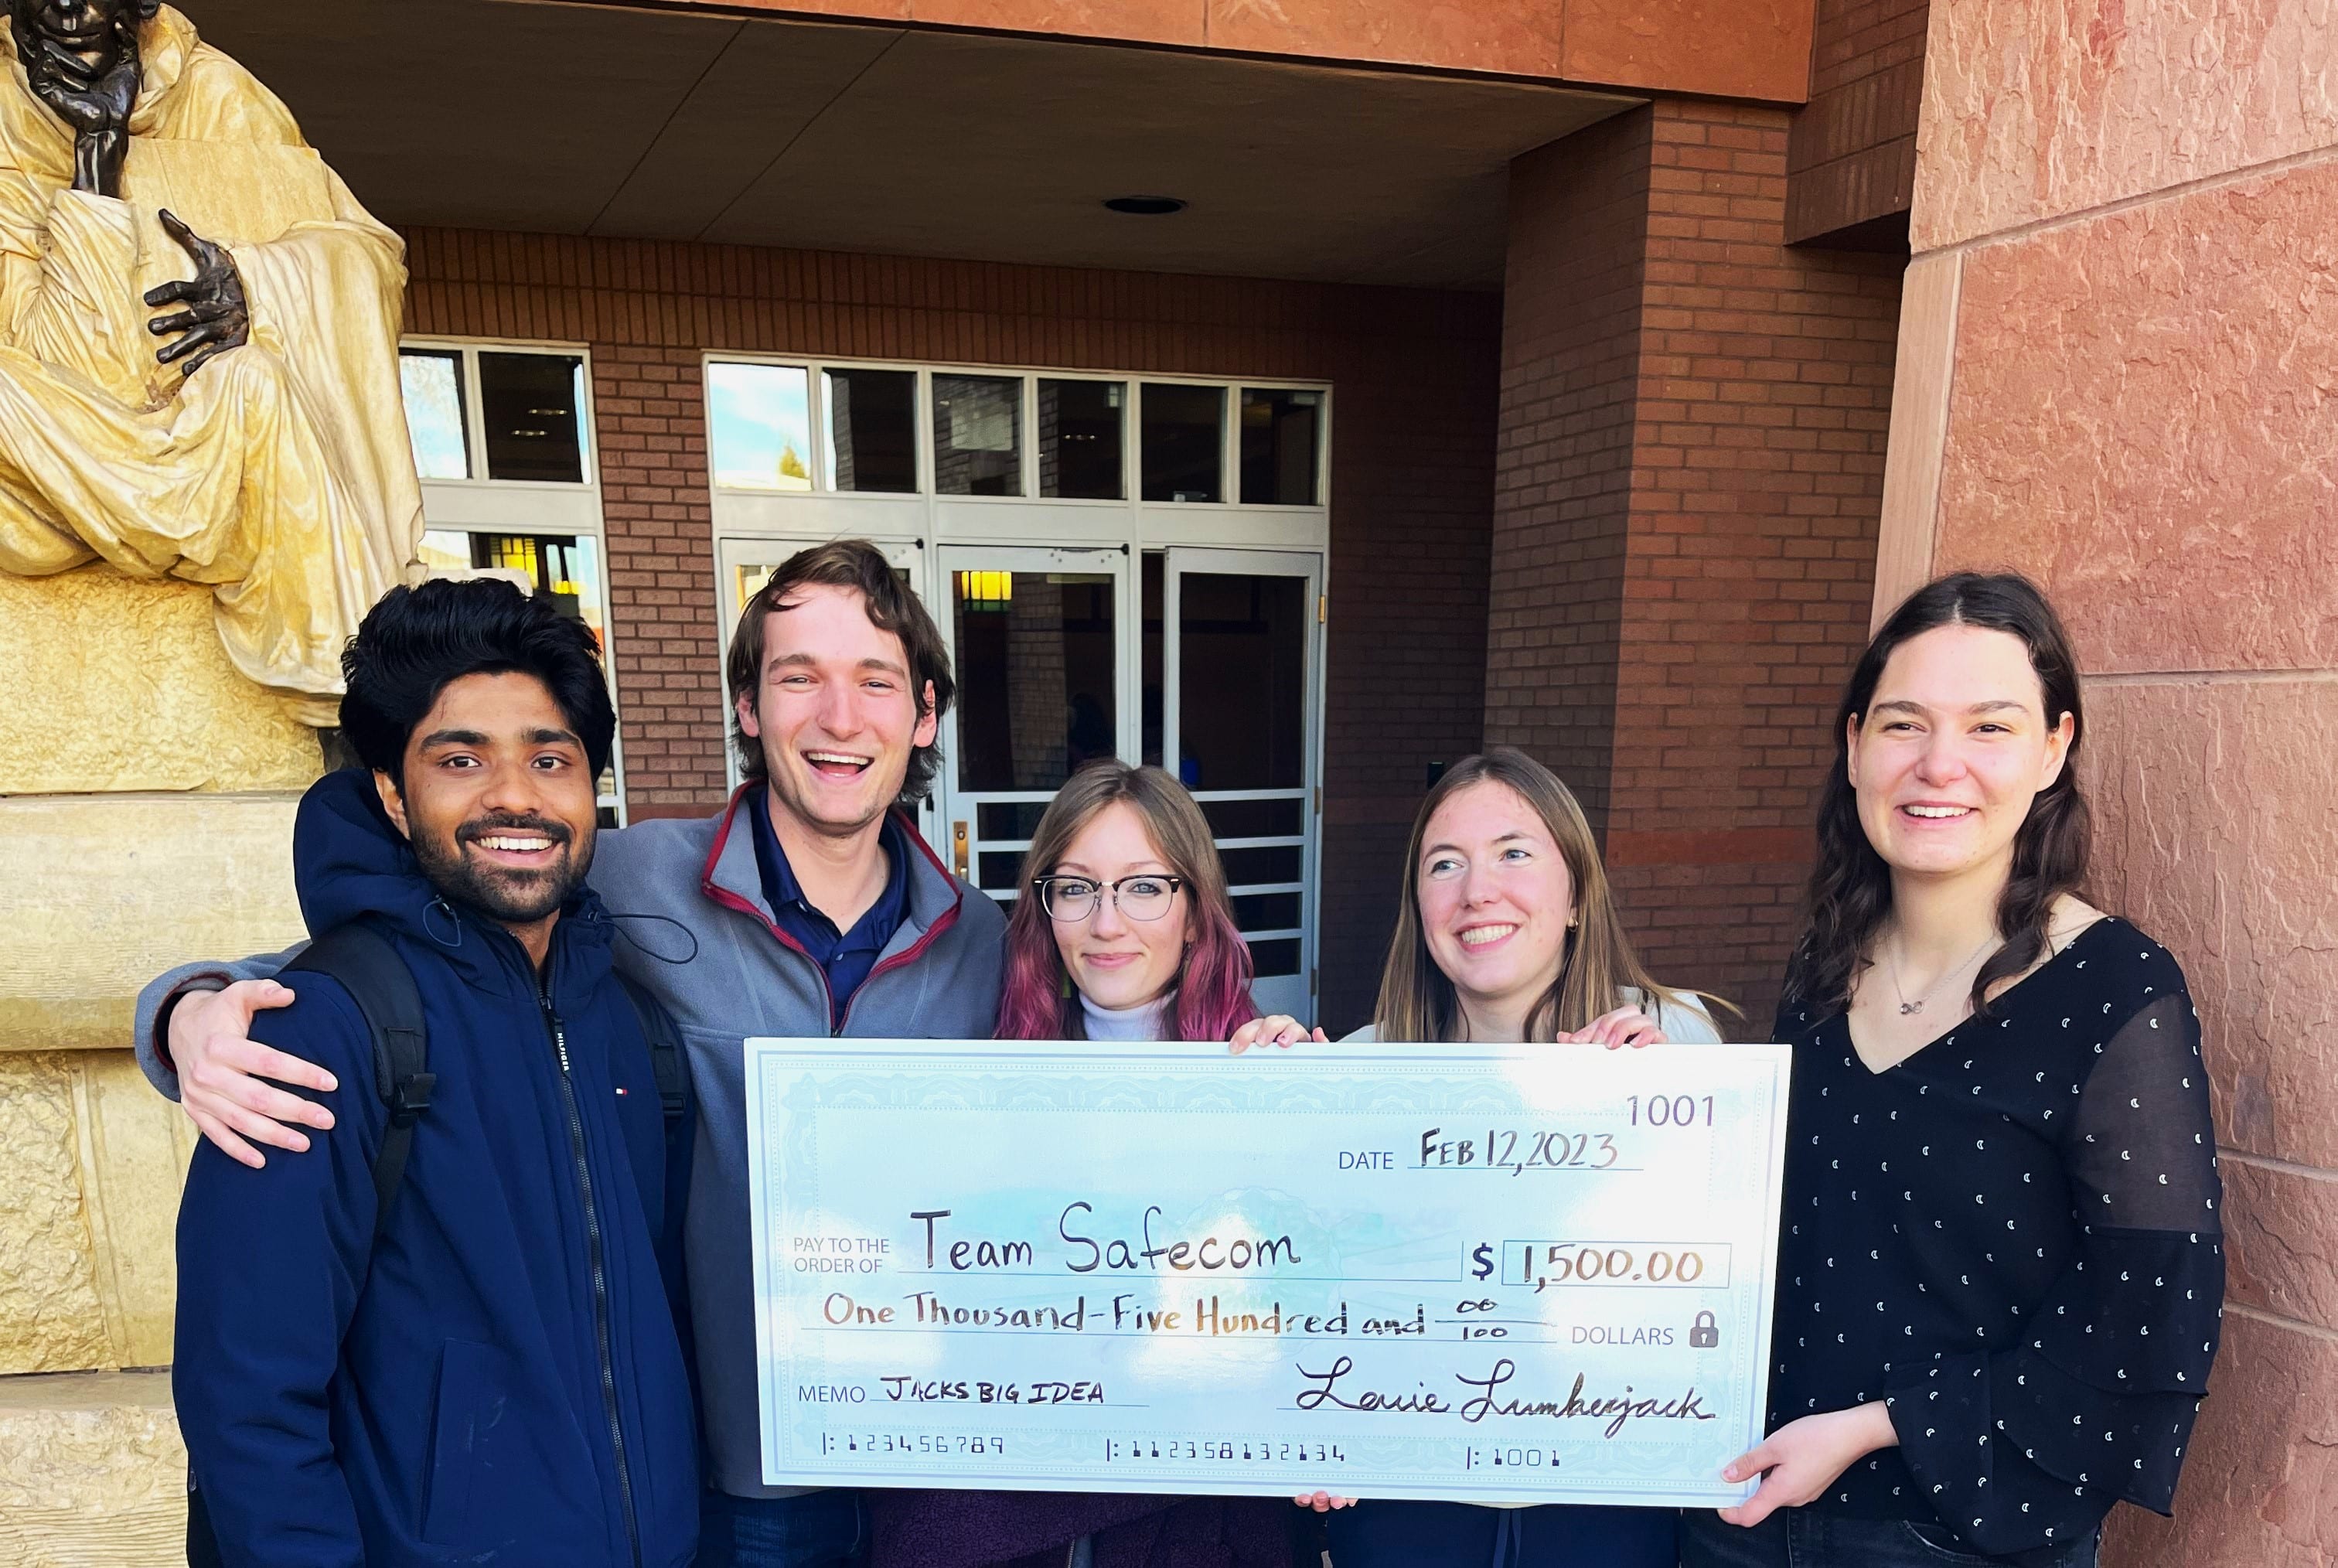 Jacks Big IDEA Winners from left to right: Rohit John, Caden Montesano, Allison Willett-Pishkin, McKinley Burnett, and Alexis Junk holding their big check in front of them standing in fron of Cline Library